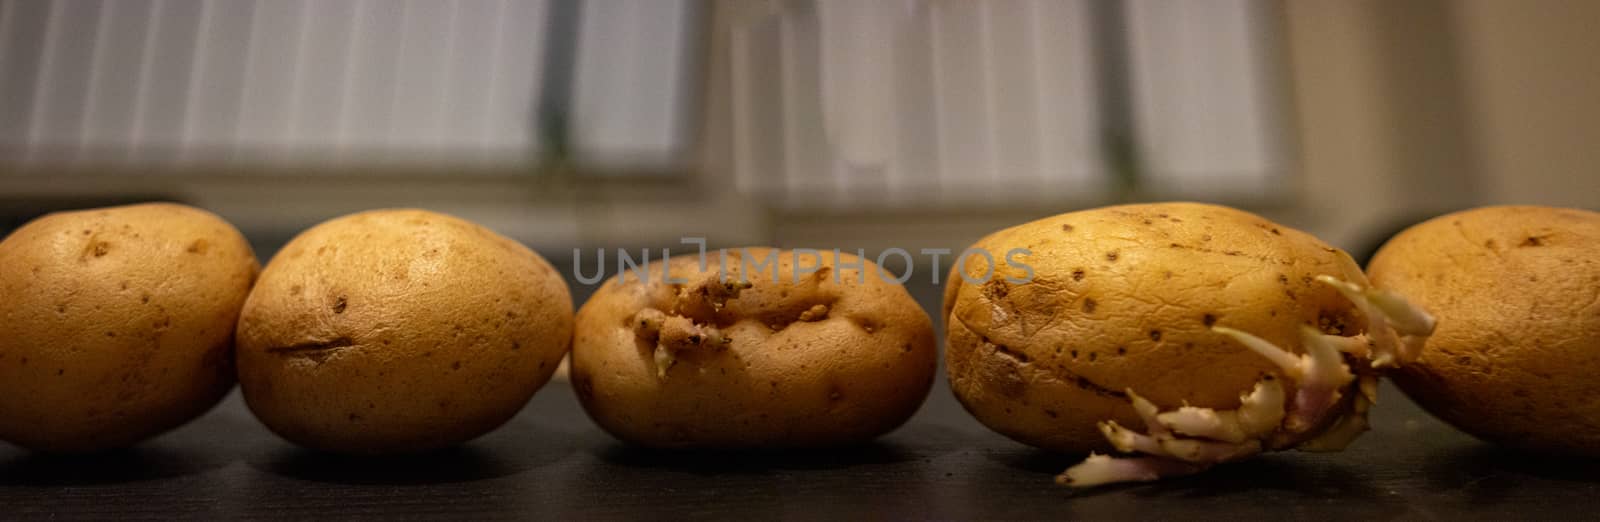 Old potatoes lined up on a table and stitched into a panorama by mynewturtle1